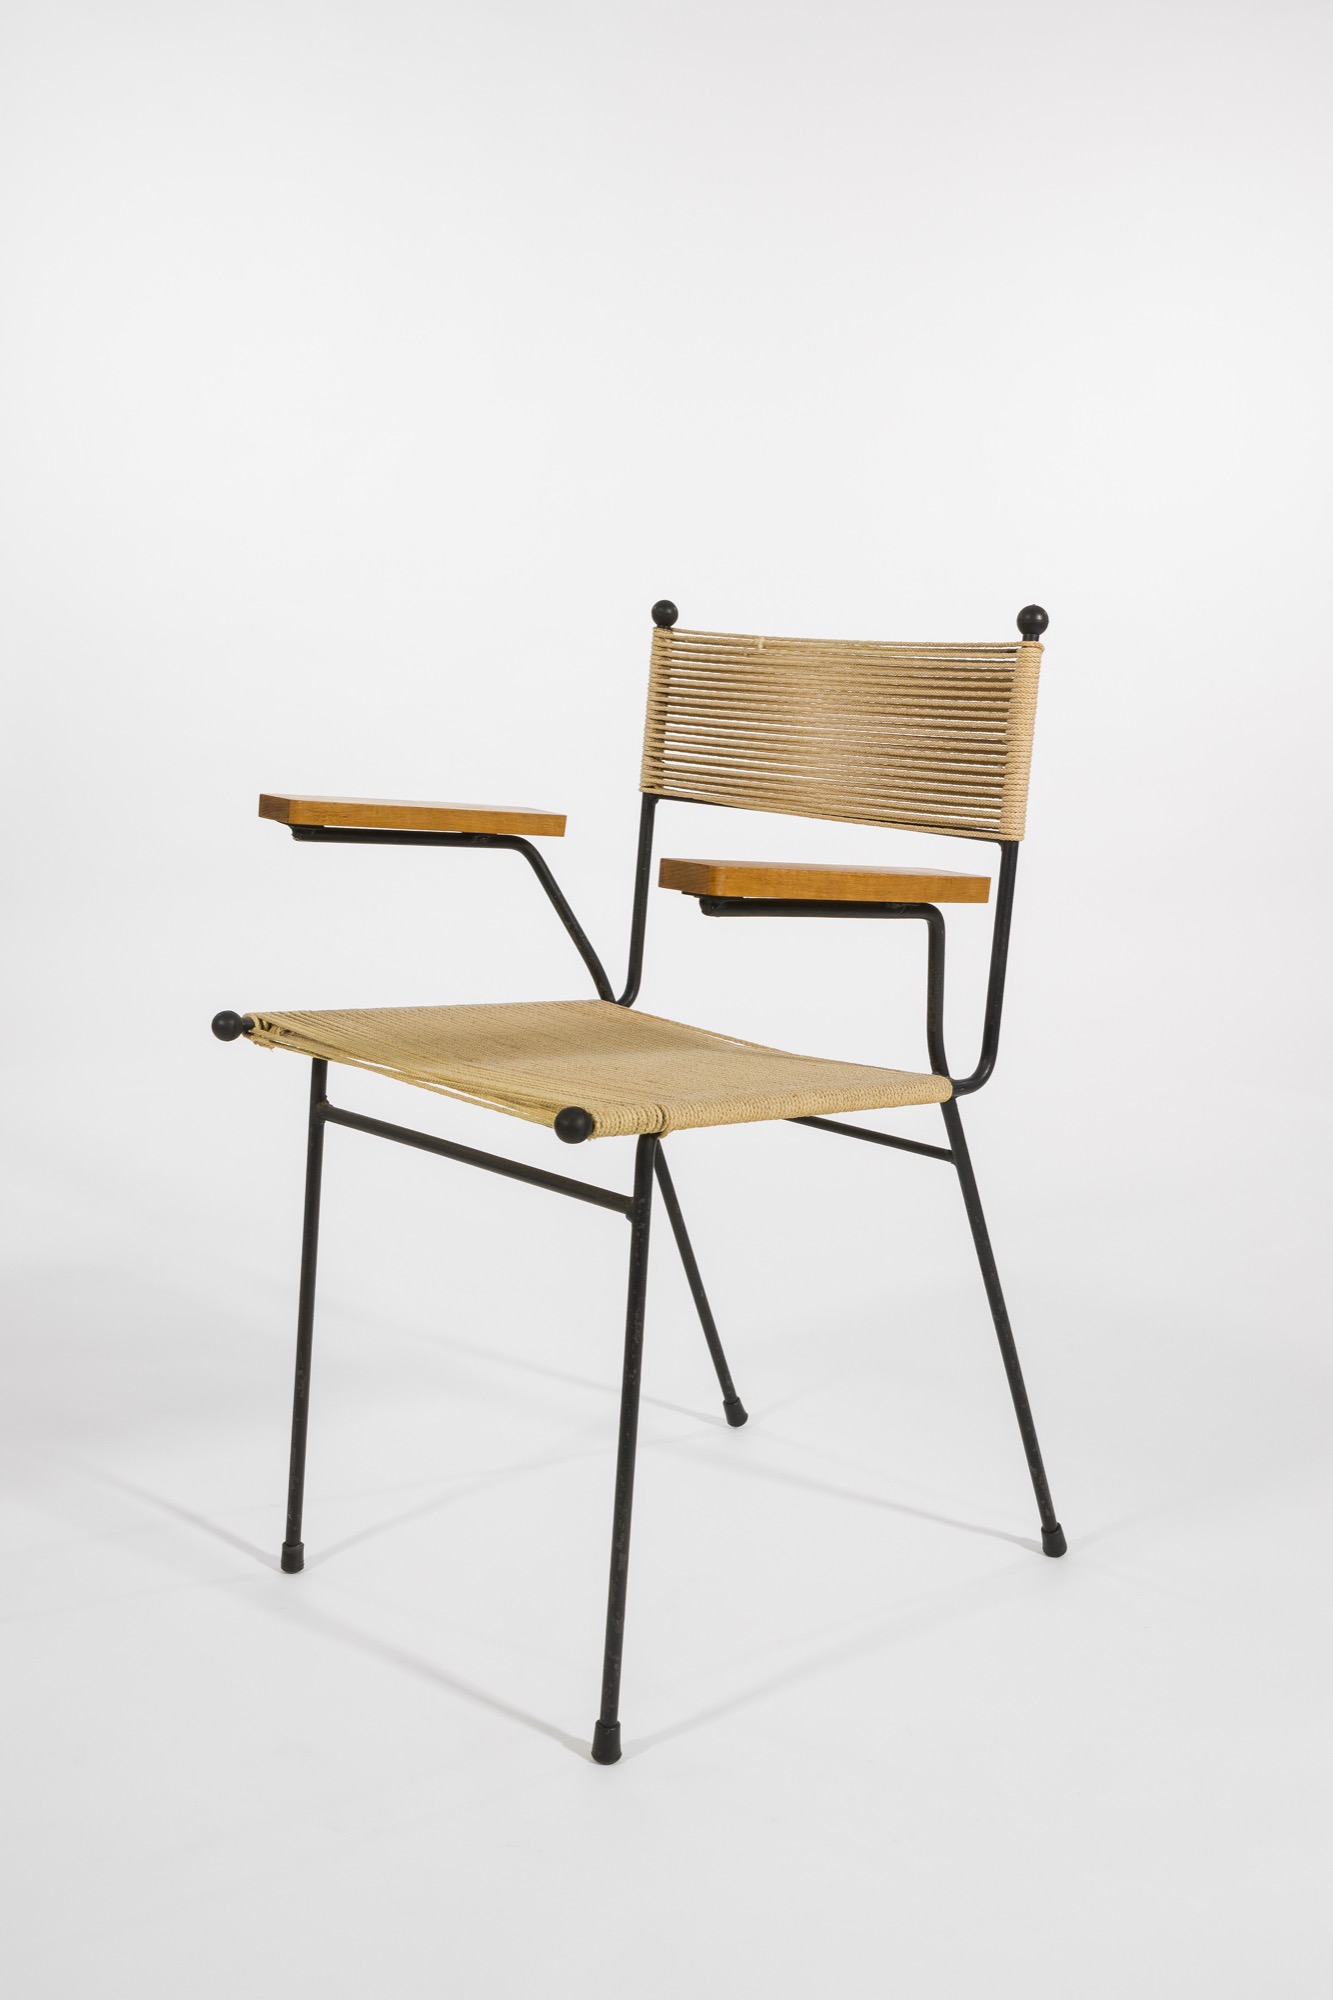 Clement Meadmore, <em>Corded armchair</em>, 1952, painted steel, cotton cord, rubber. Private Collection.